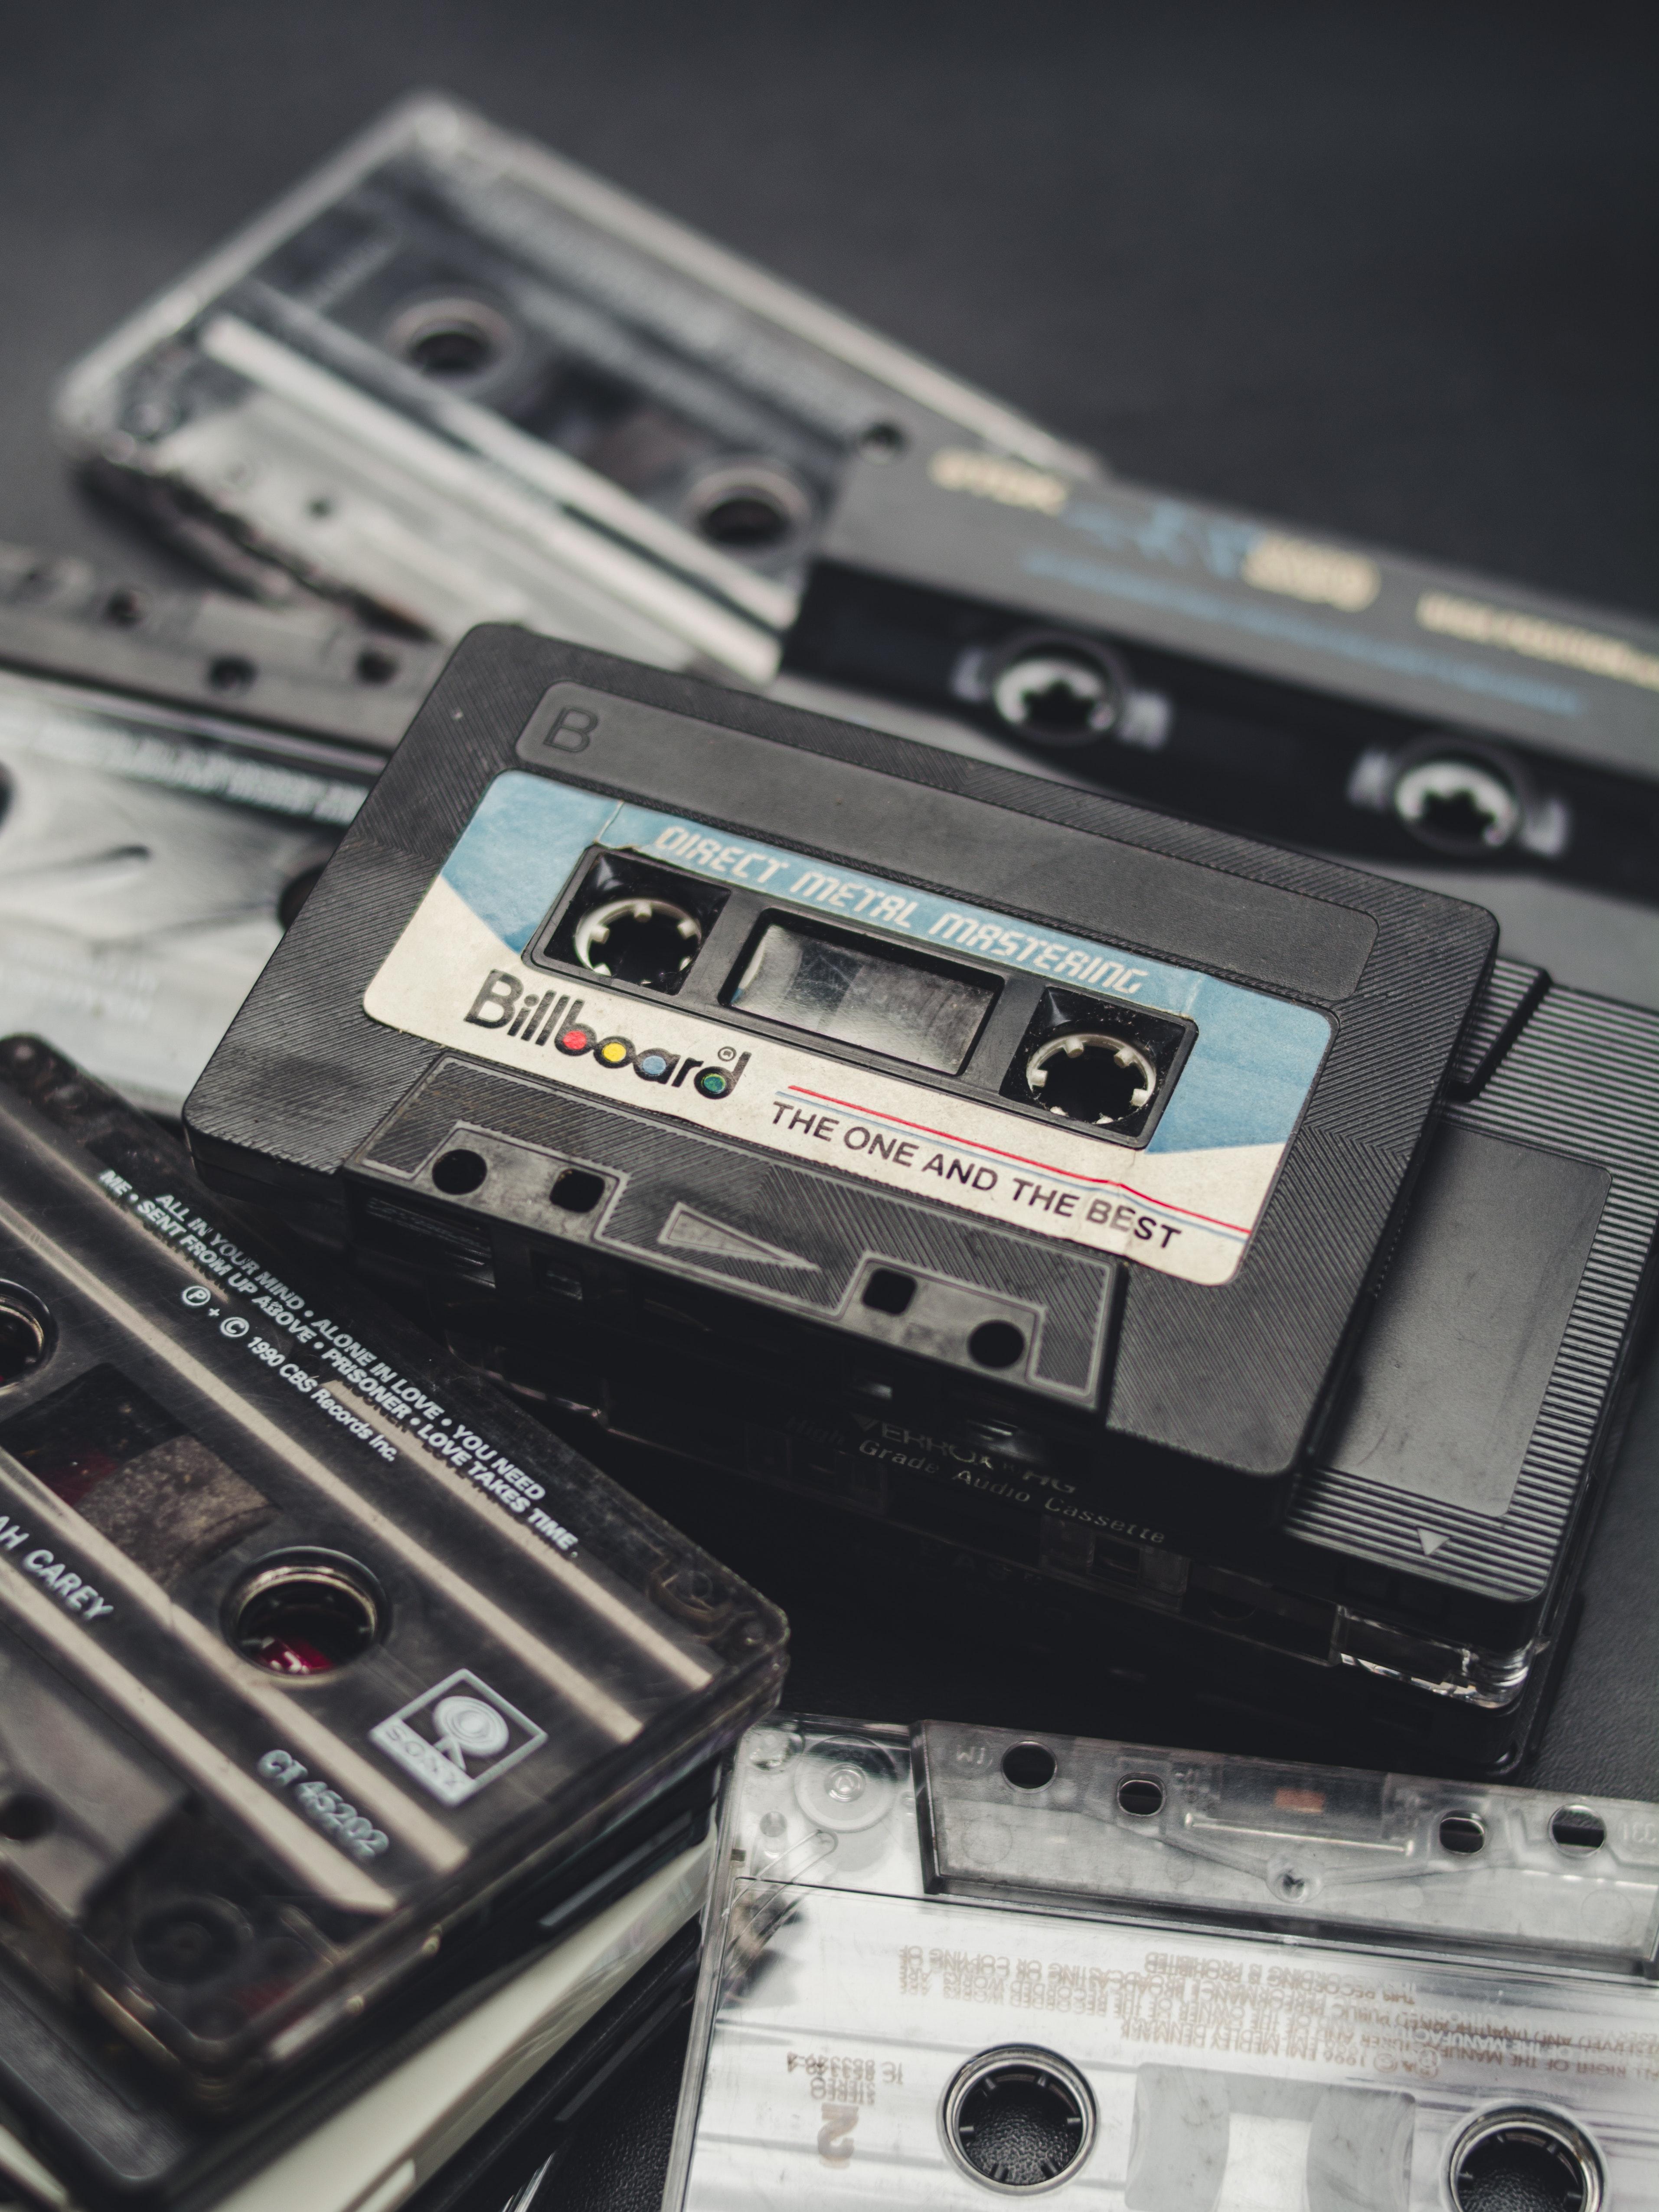 Cassette Player Wallpapers - Top Free Cassette Player Backgrounds ...